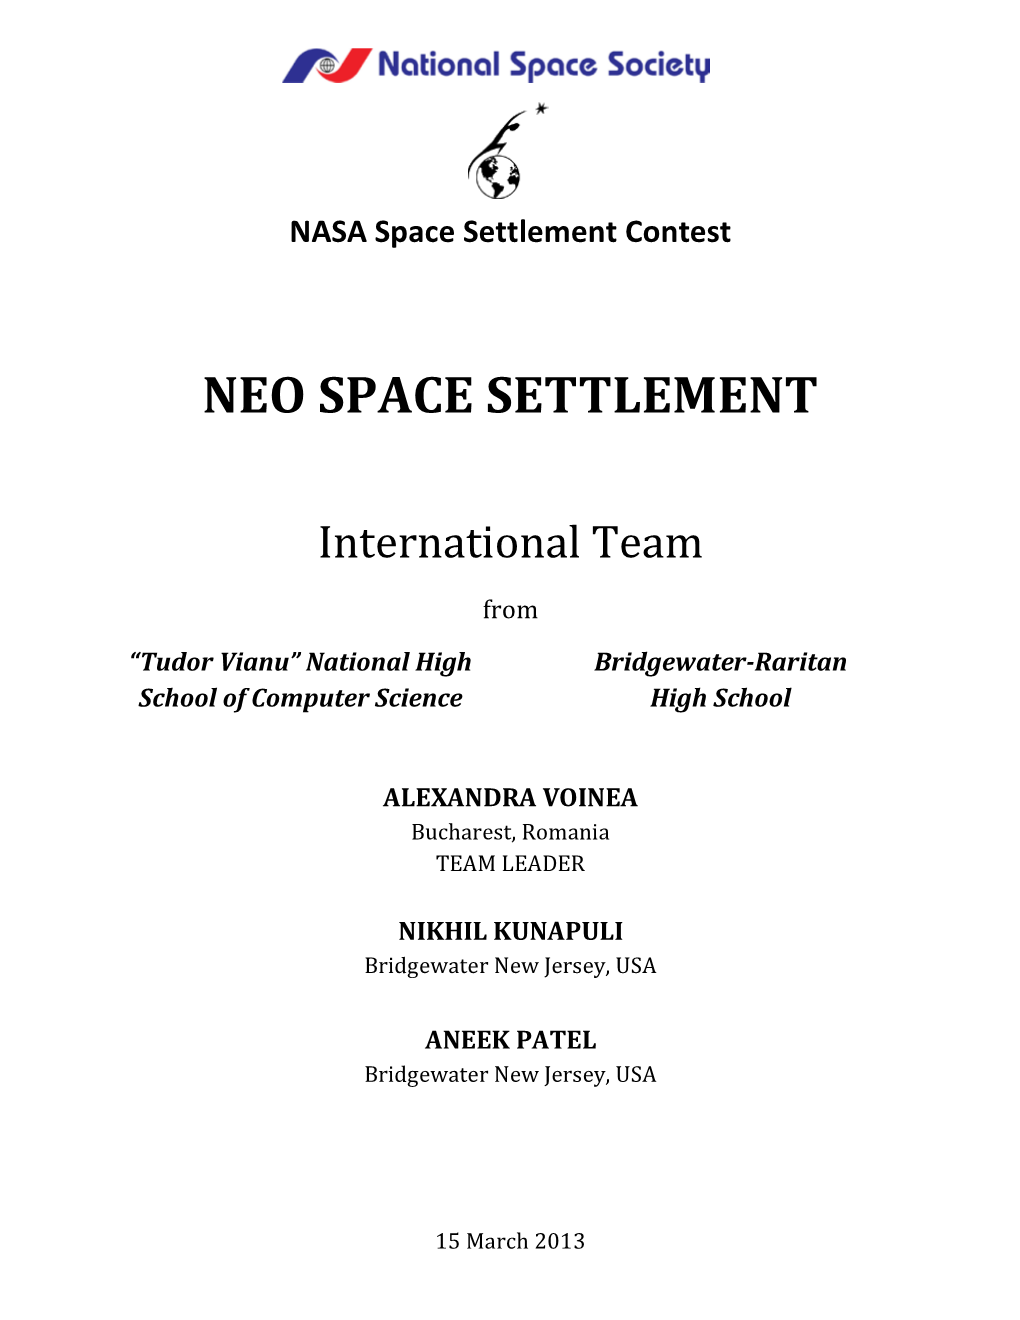 Neo Space Settlement